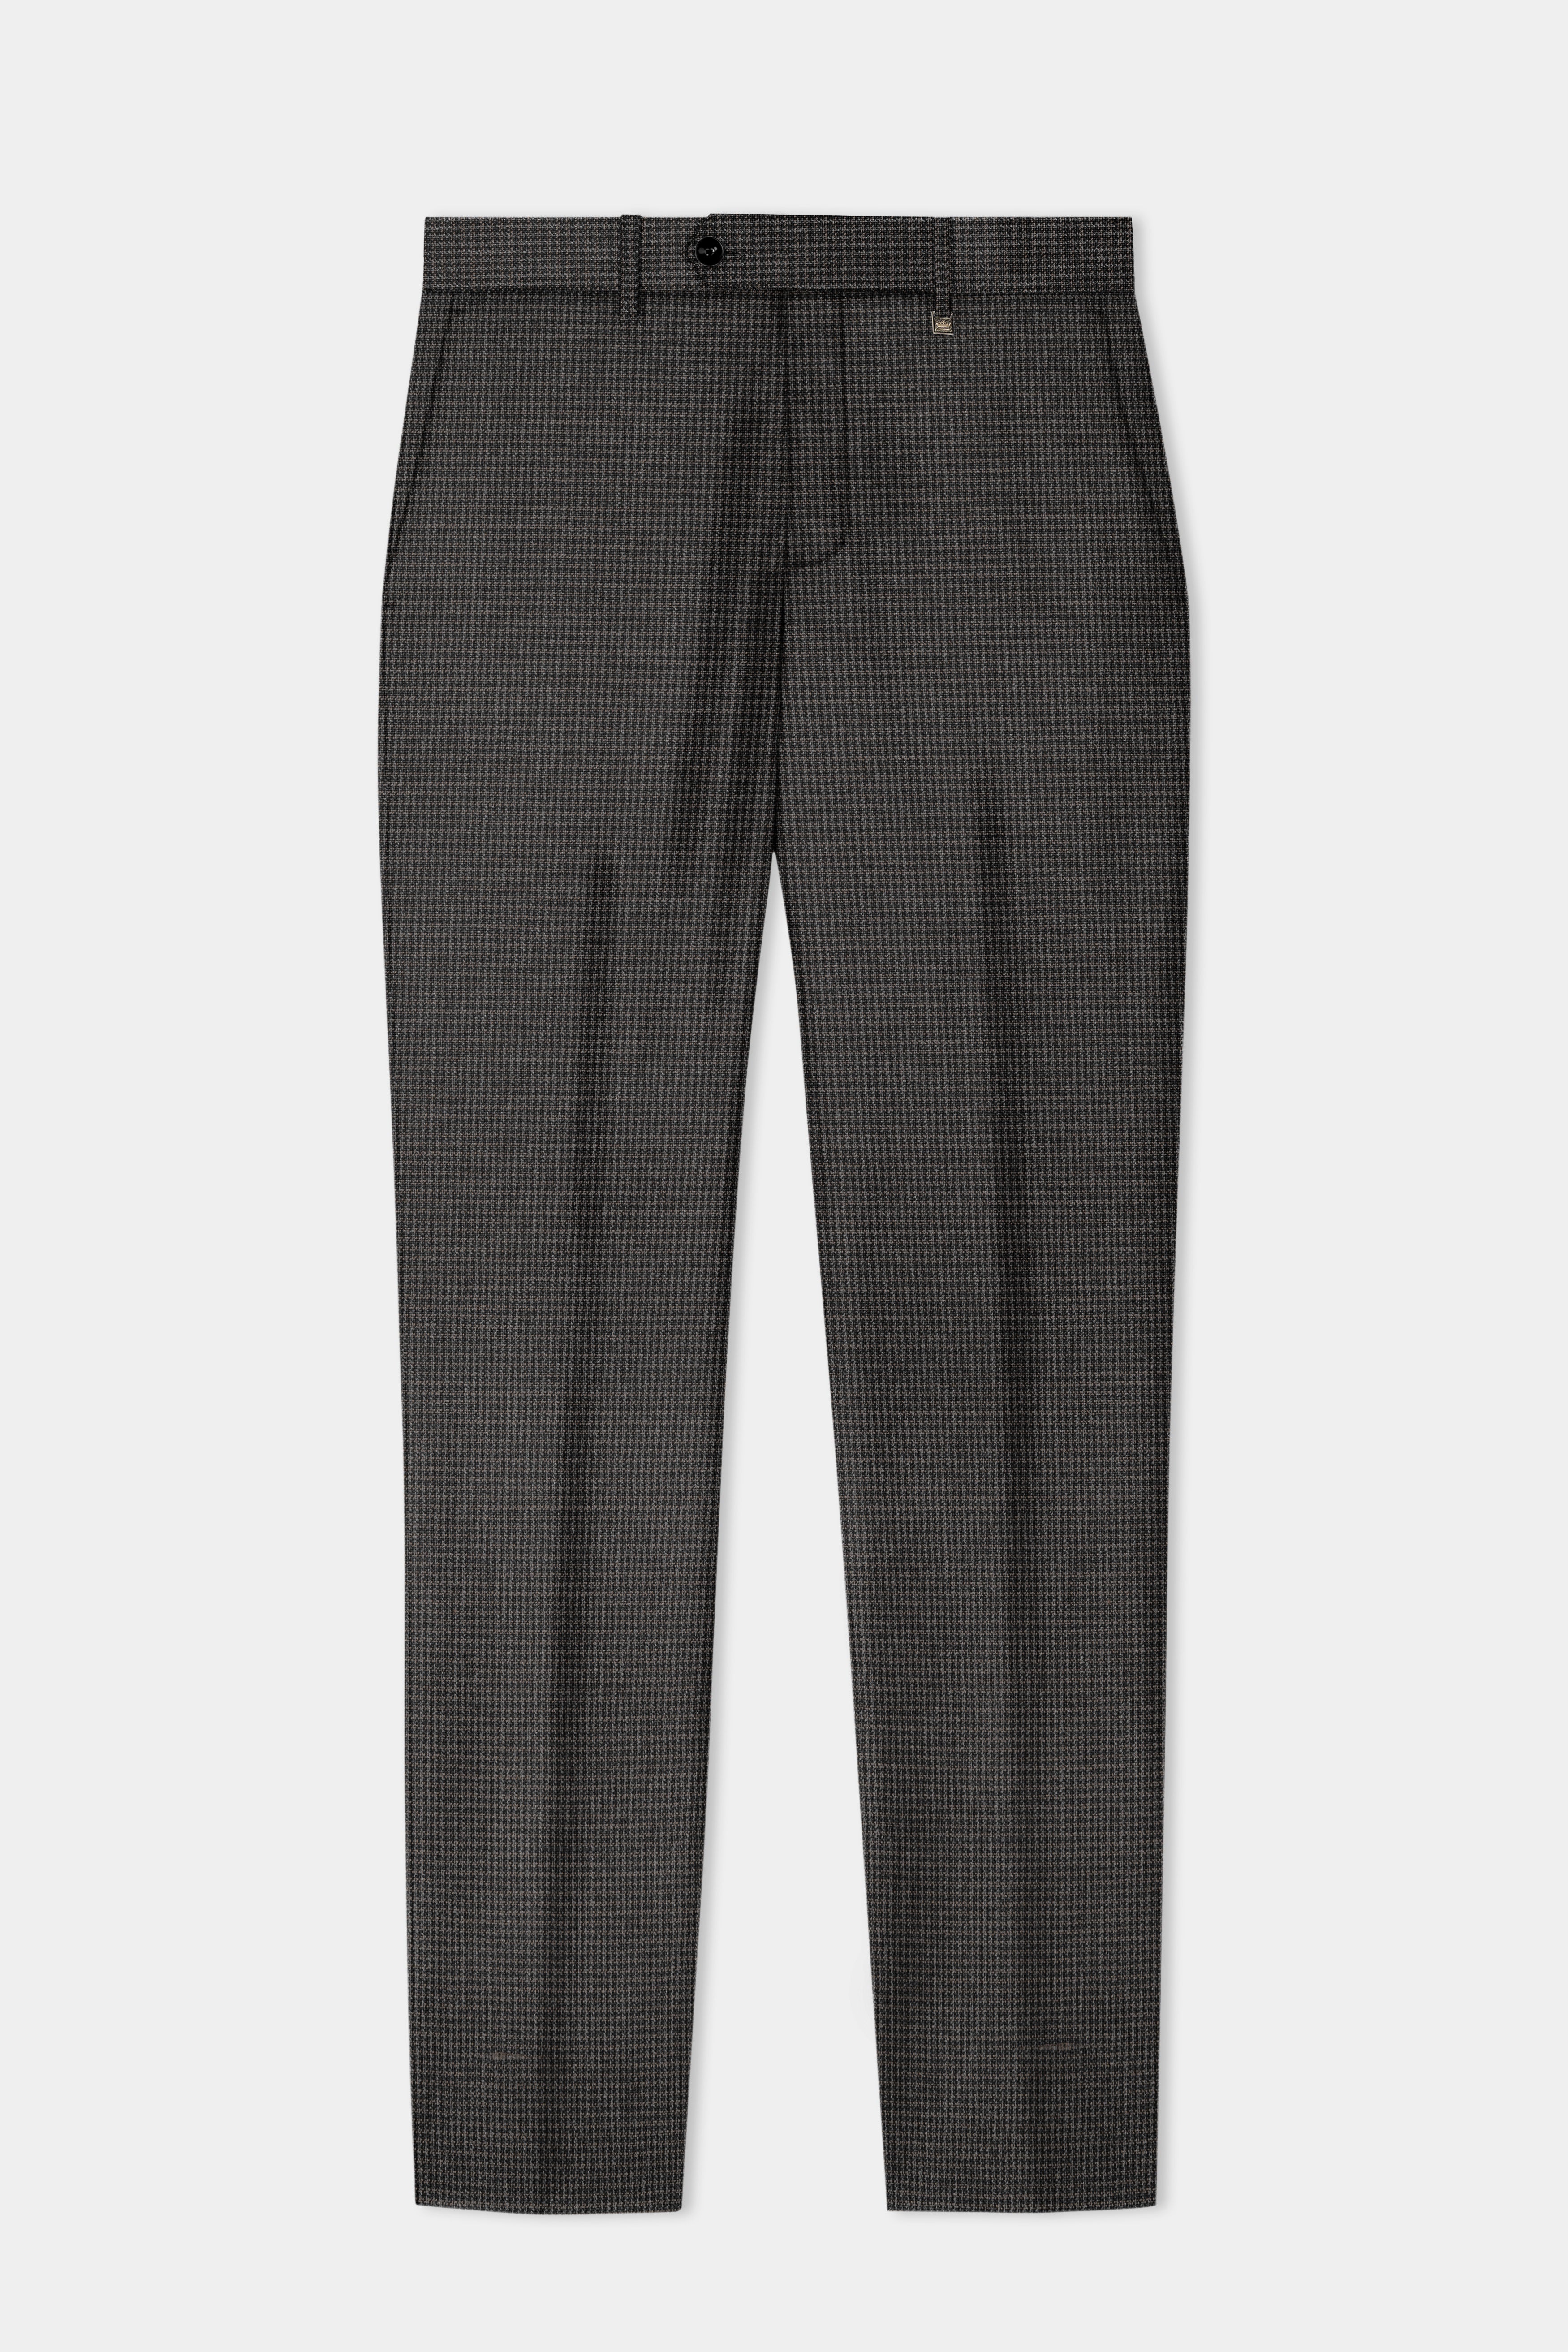 Iridium Brown Micro Checkered Wool Blend Double Breasted Suit